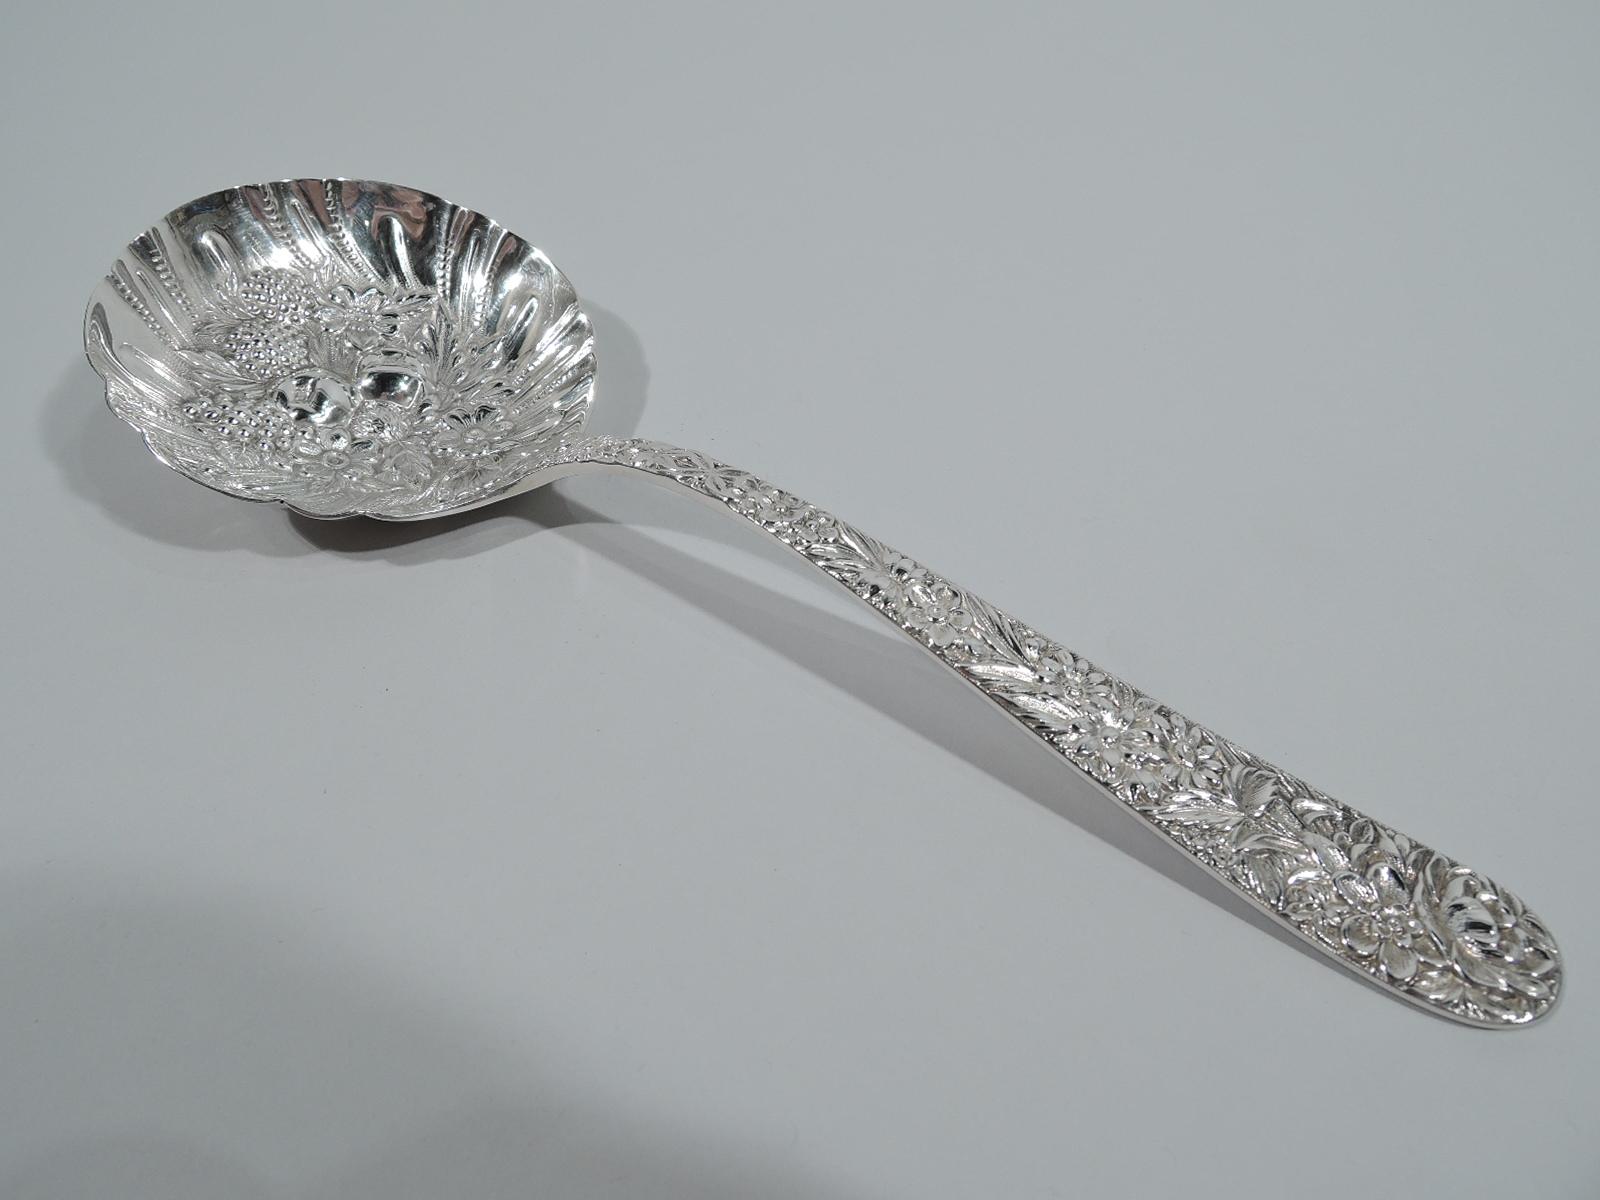 Antique Repousse sterling silver berry spoon. Made by S. Kirk & Son in Baltimore. Dense low-relief flowers on tapering stem. Bowl round and crimped with repousse flowers, berries, and other fruit. A good working piece in the historic pattern.